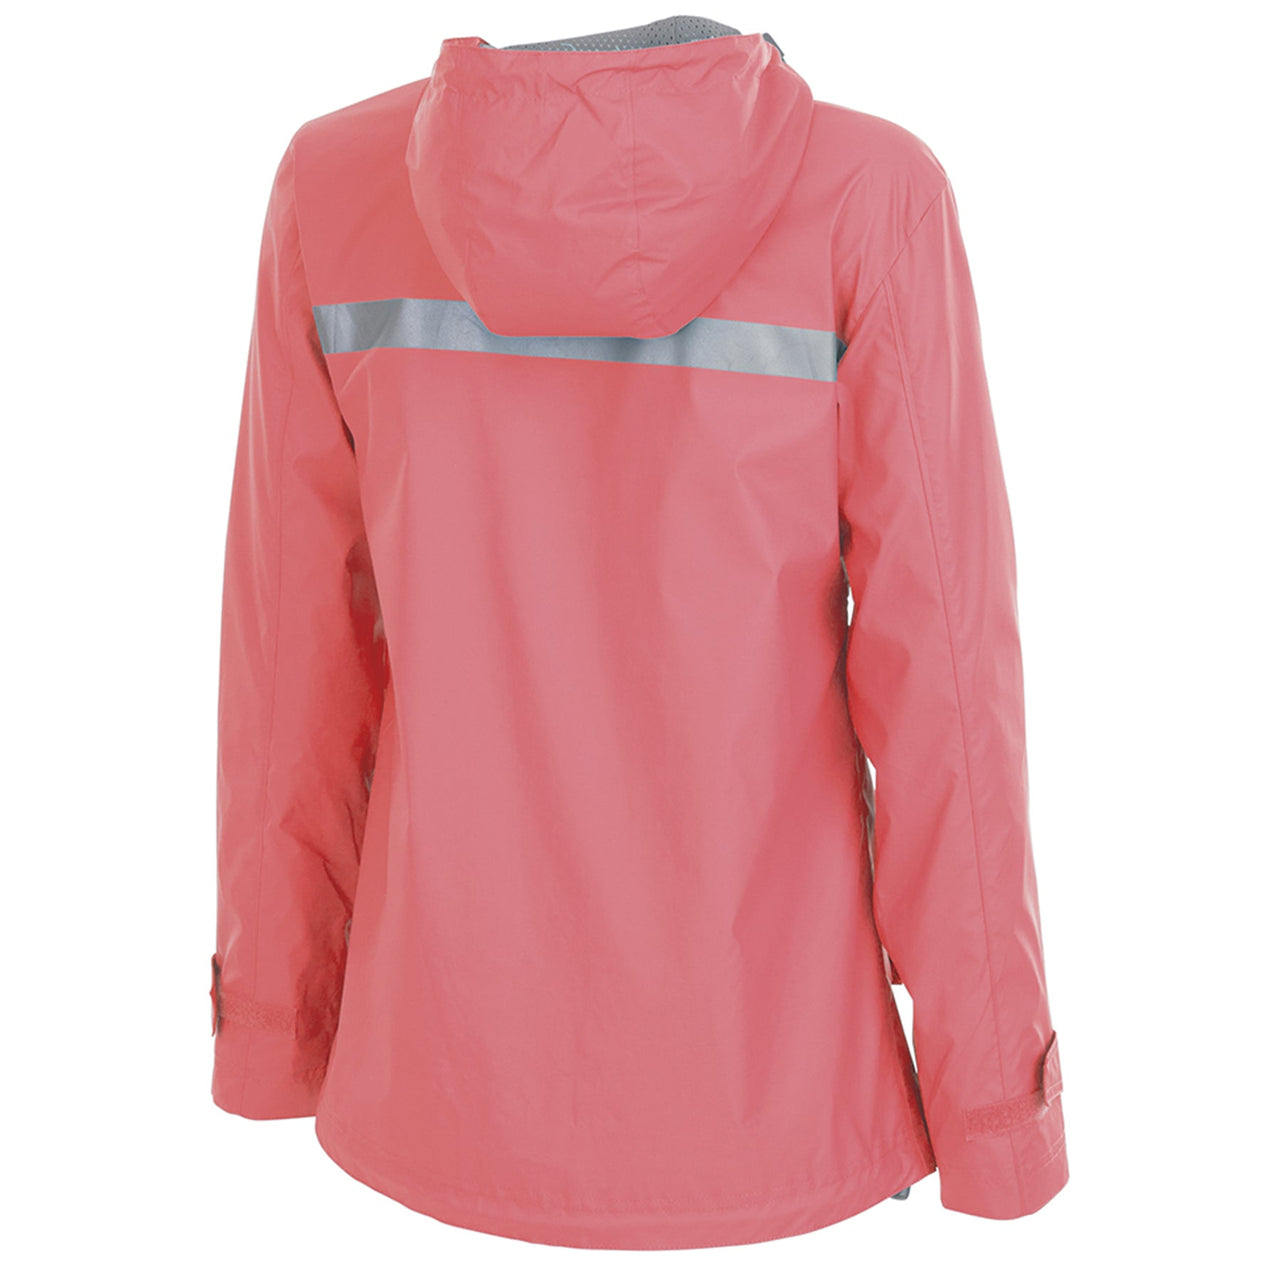 the coral windbreaker zip up women's jacket has a pink hood and a reflective band across the shoulder blades